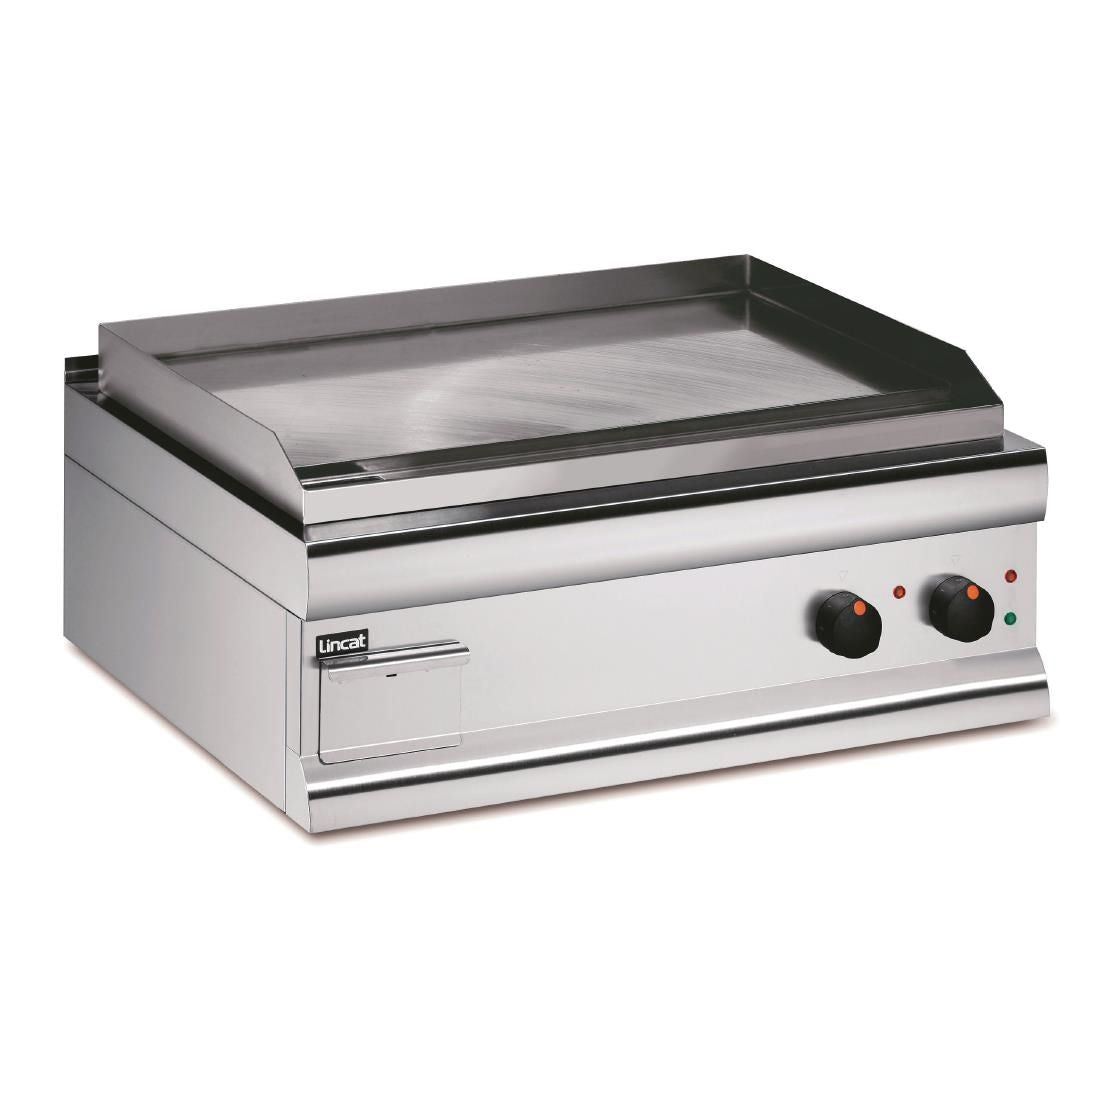 GS7/E - Lincat Silverlink 600 Electric Counter-top Griddle - Extra Power - W 750 mm - 7.0 kW JD Catering Equipment Solutions Ltd